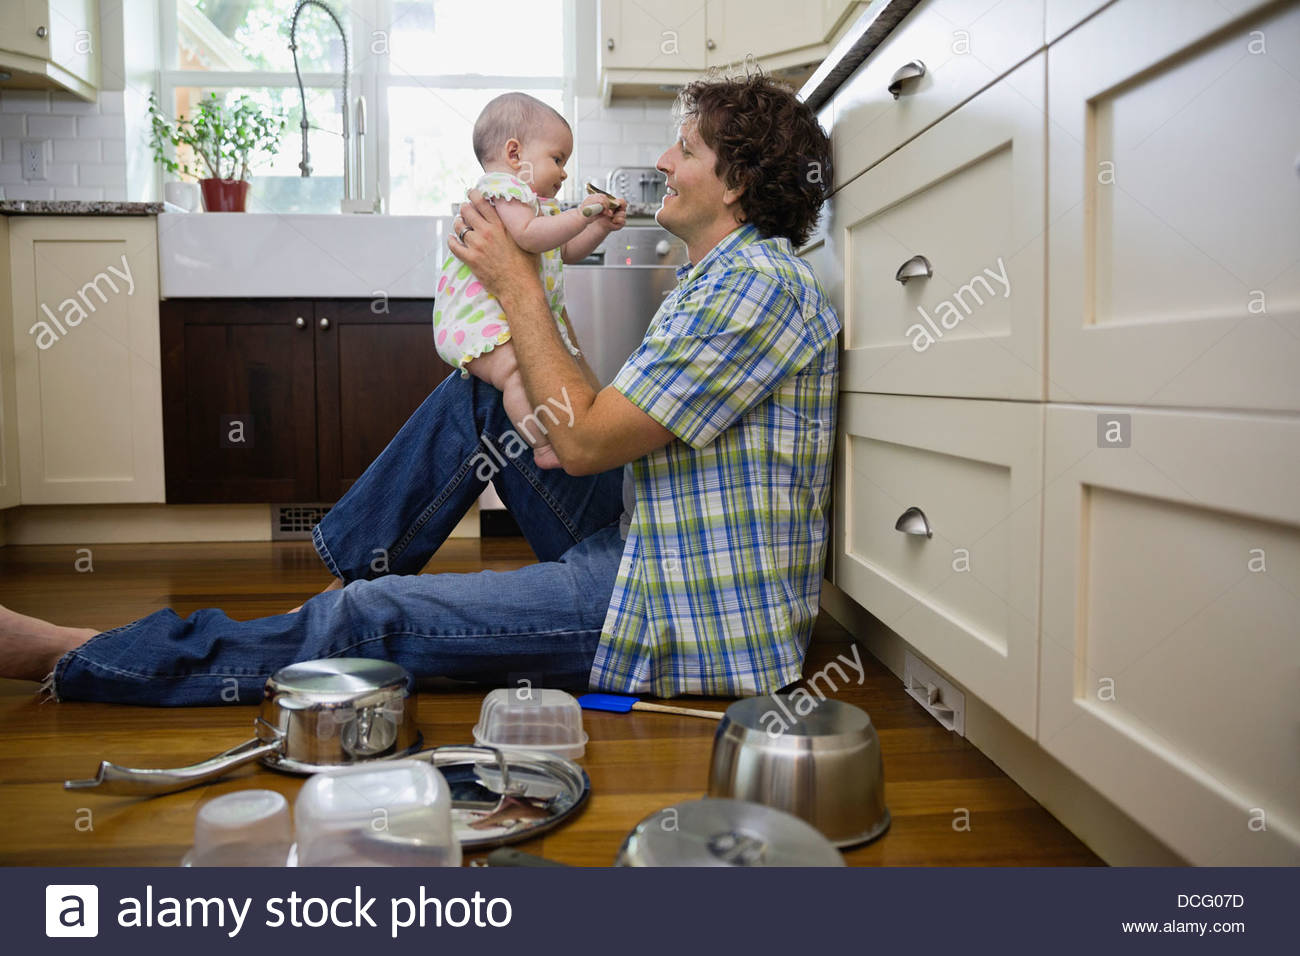 Profile shot of father and baby girl in kitchen Stock Photo